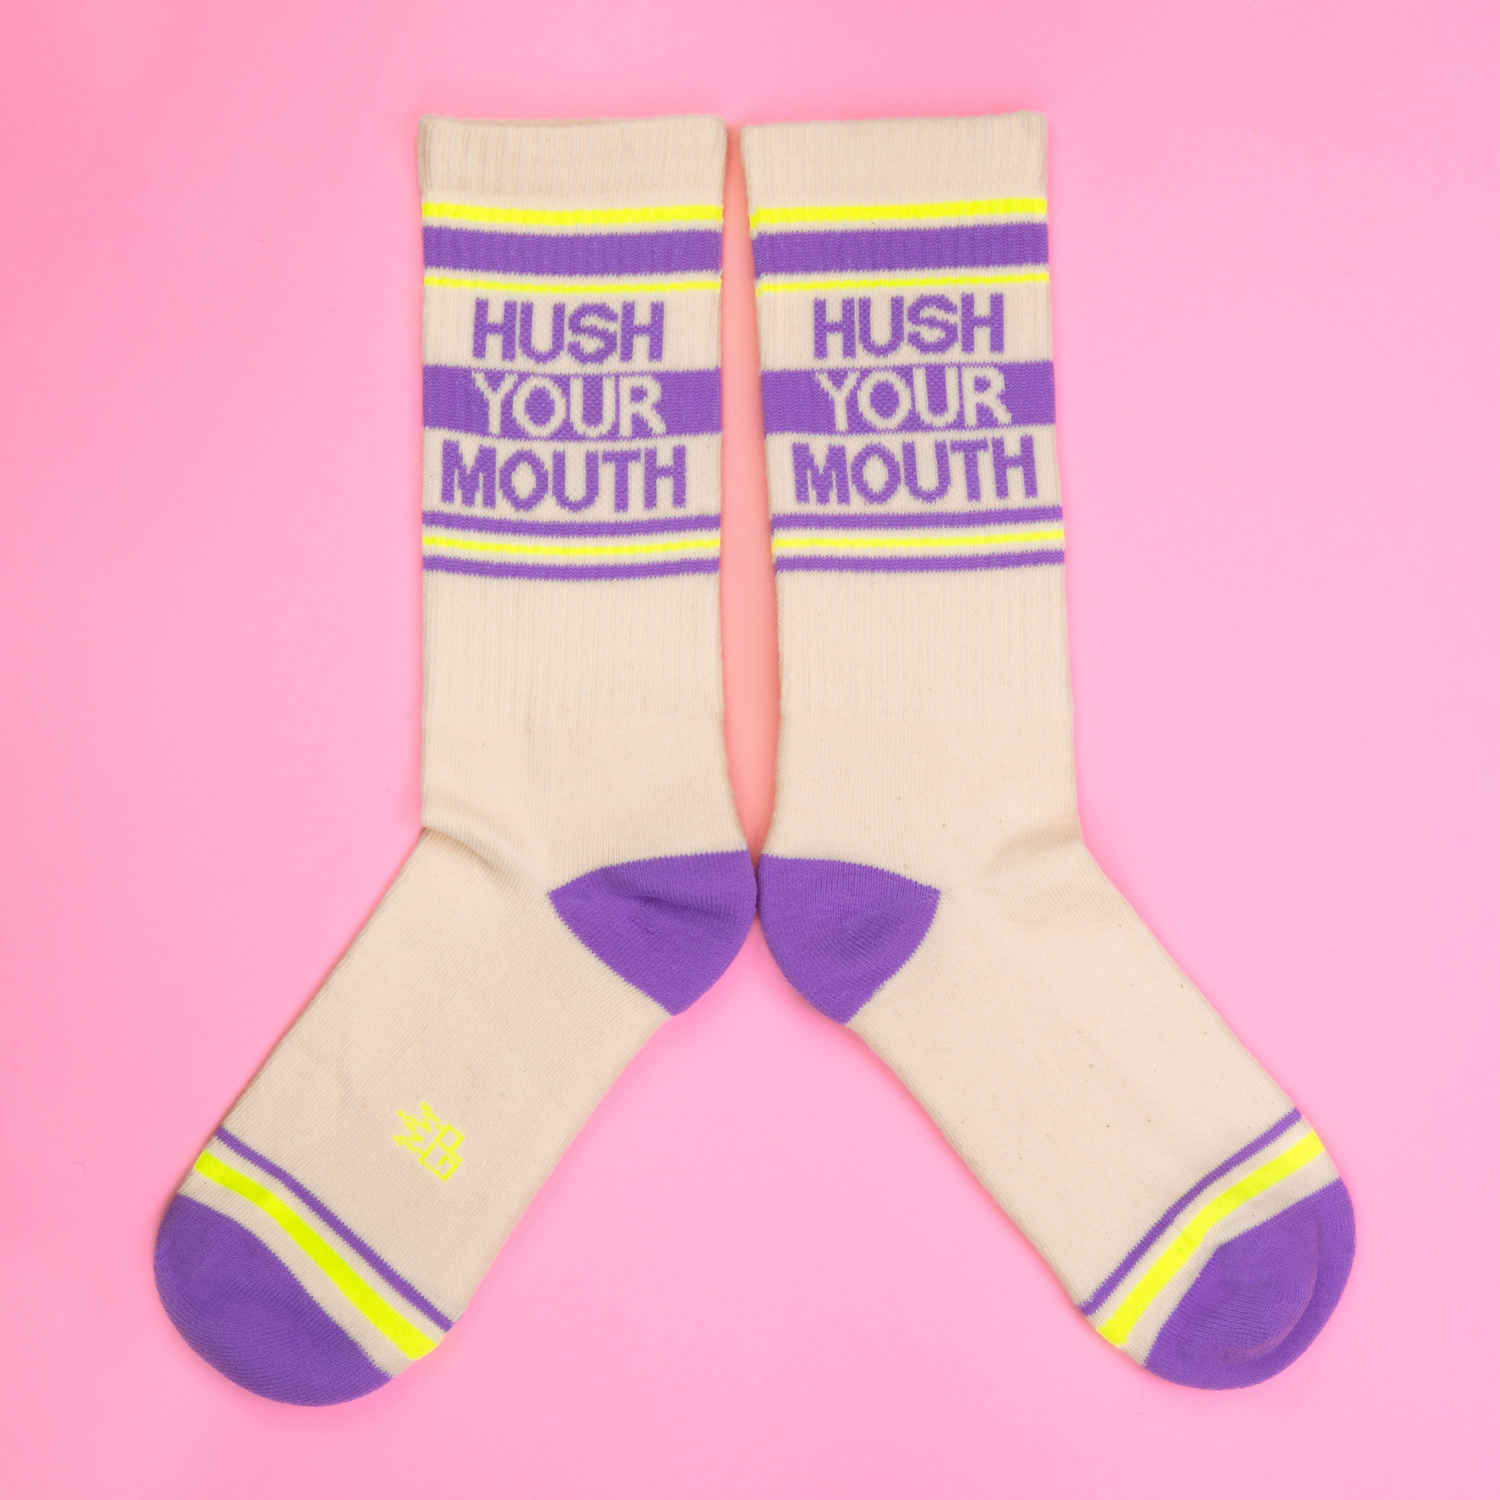 Hush Your Mouth